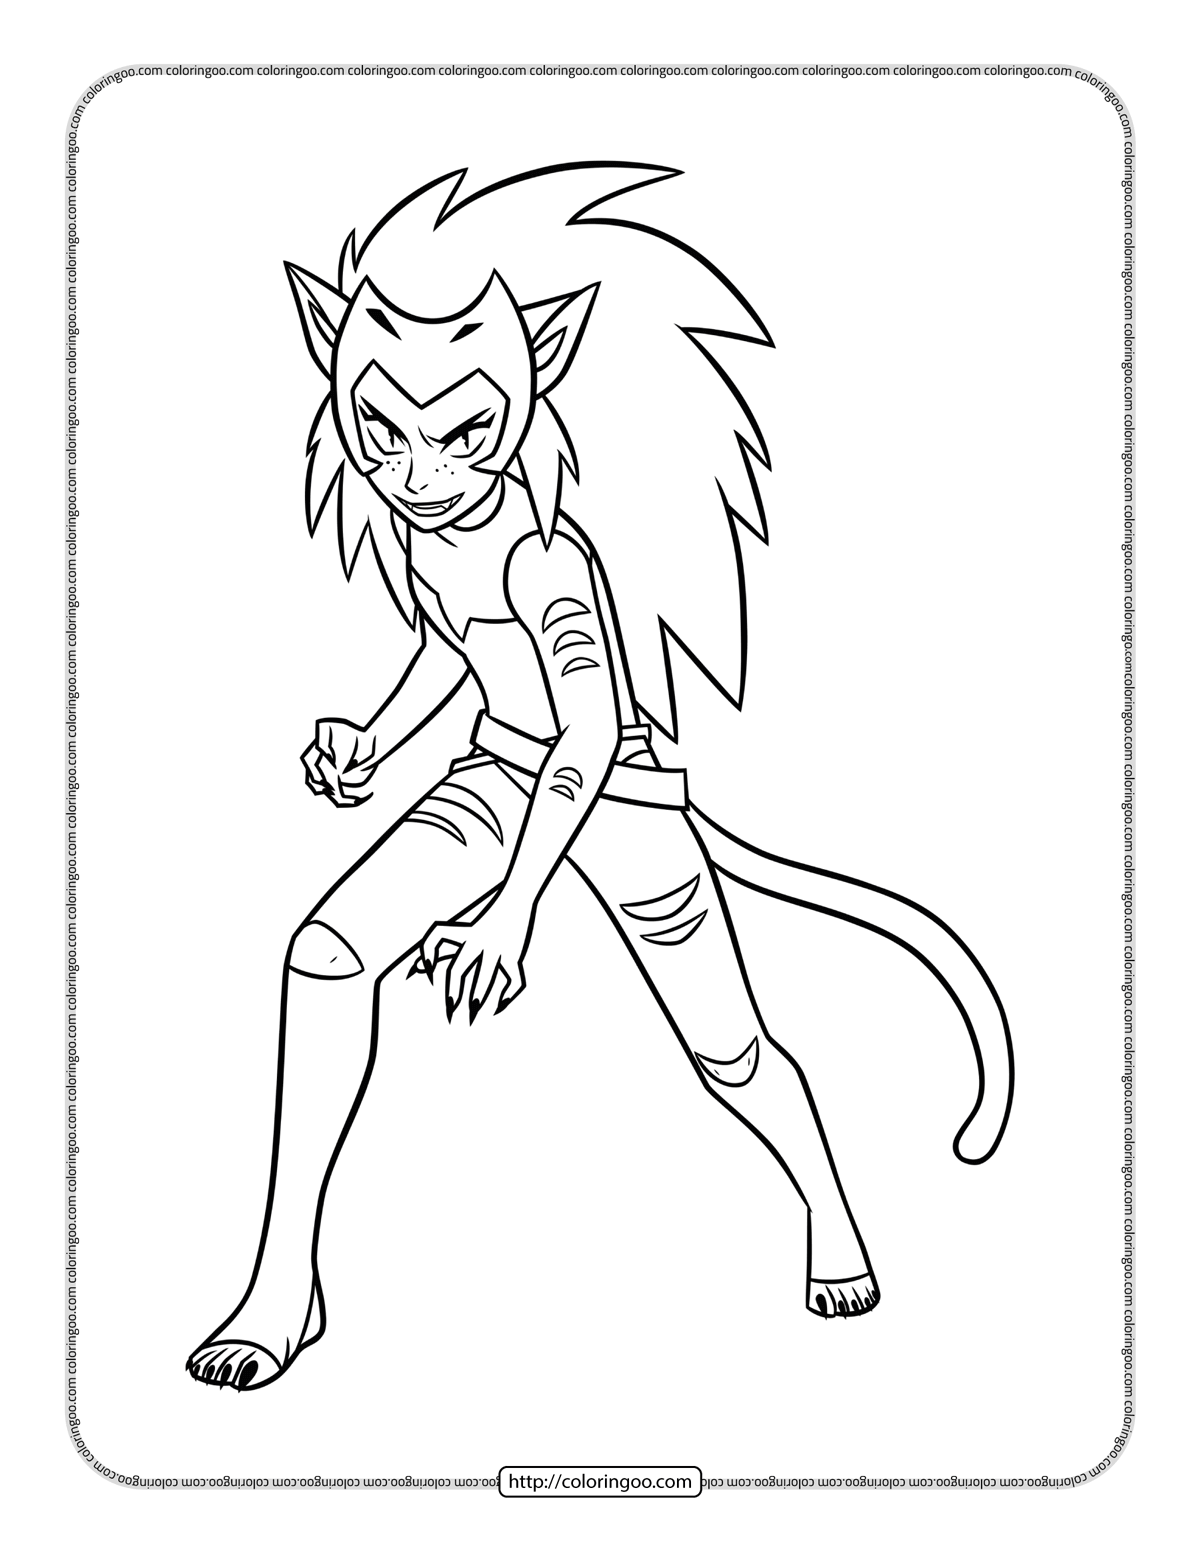 catra from she ra coloring pages